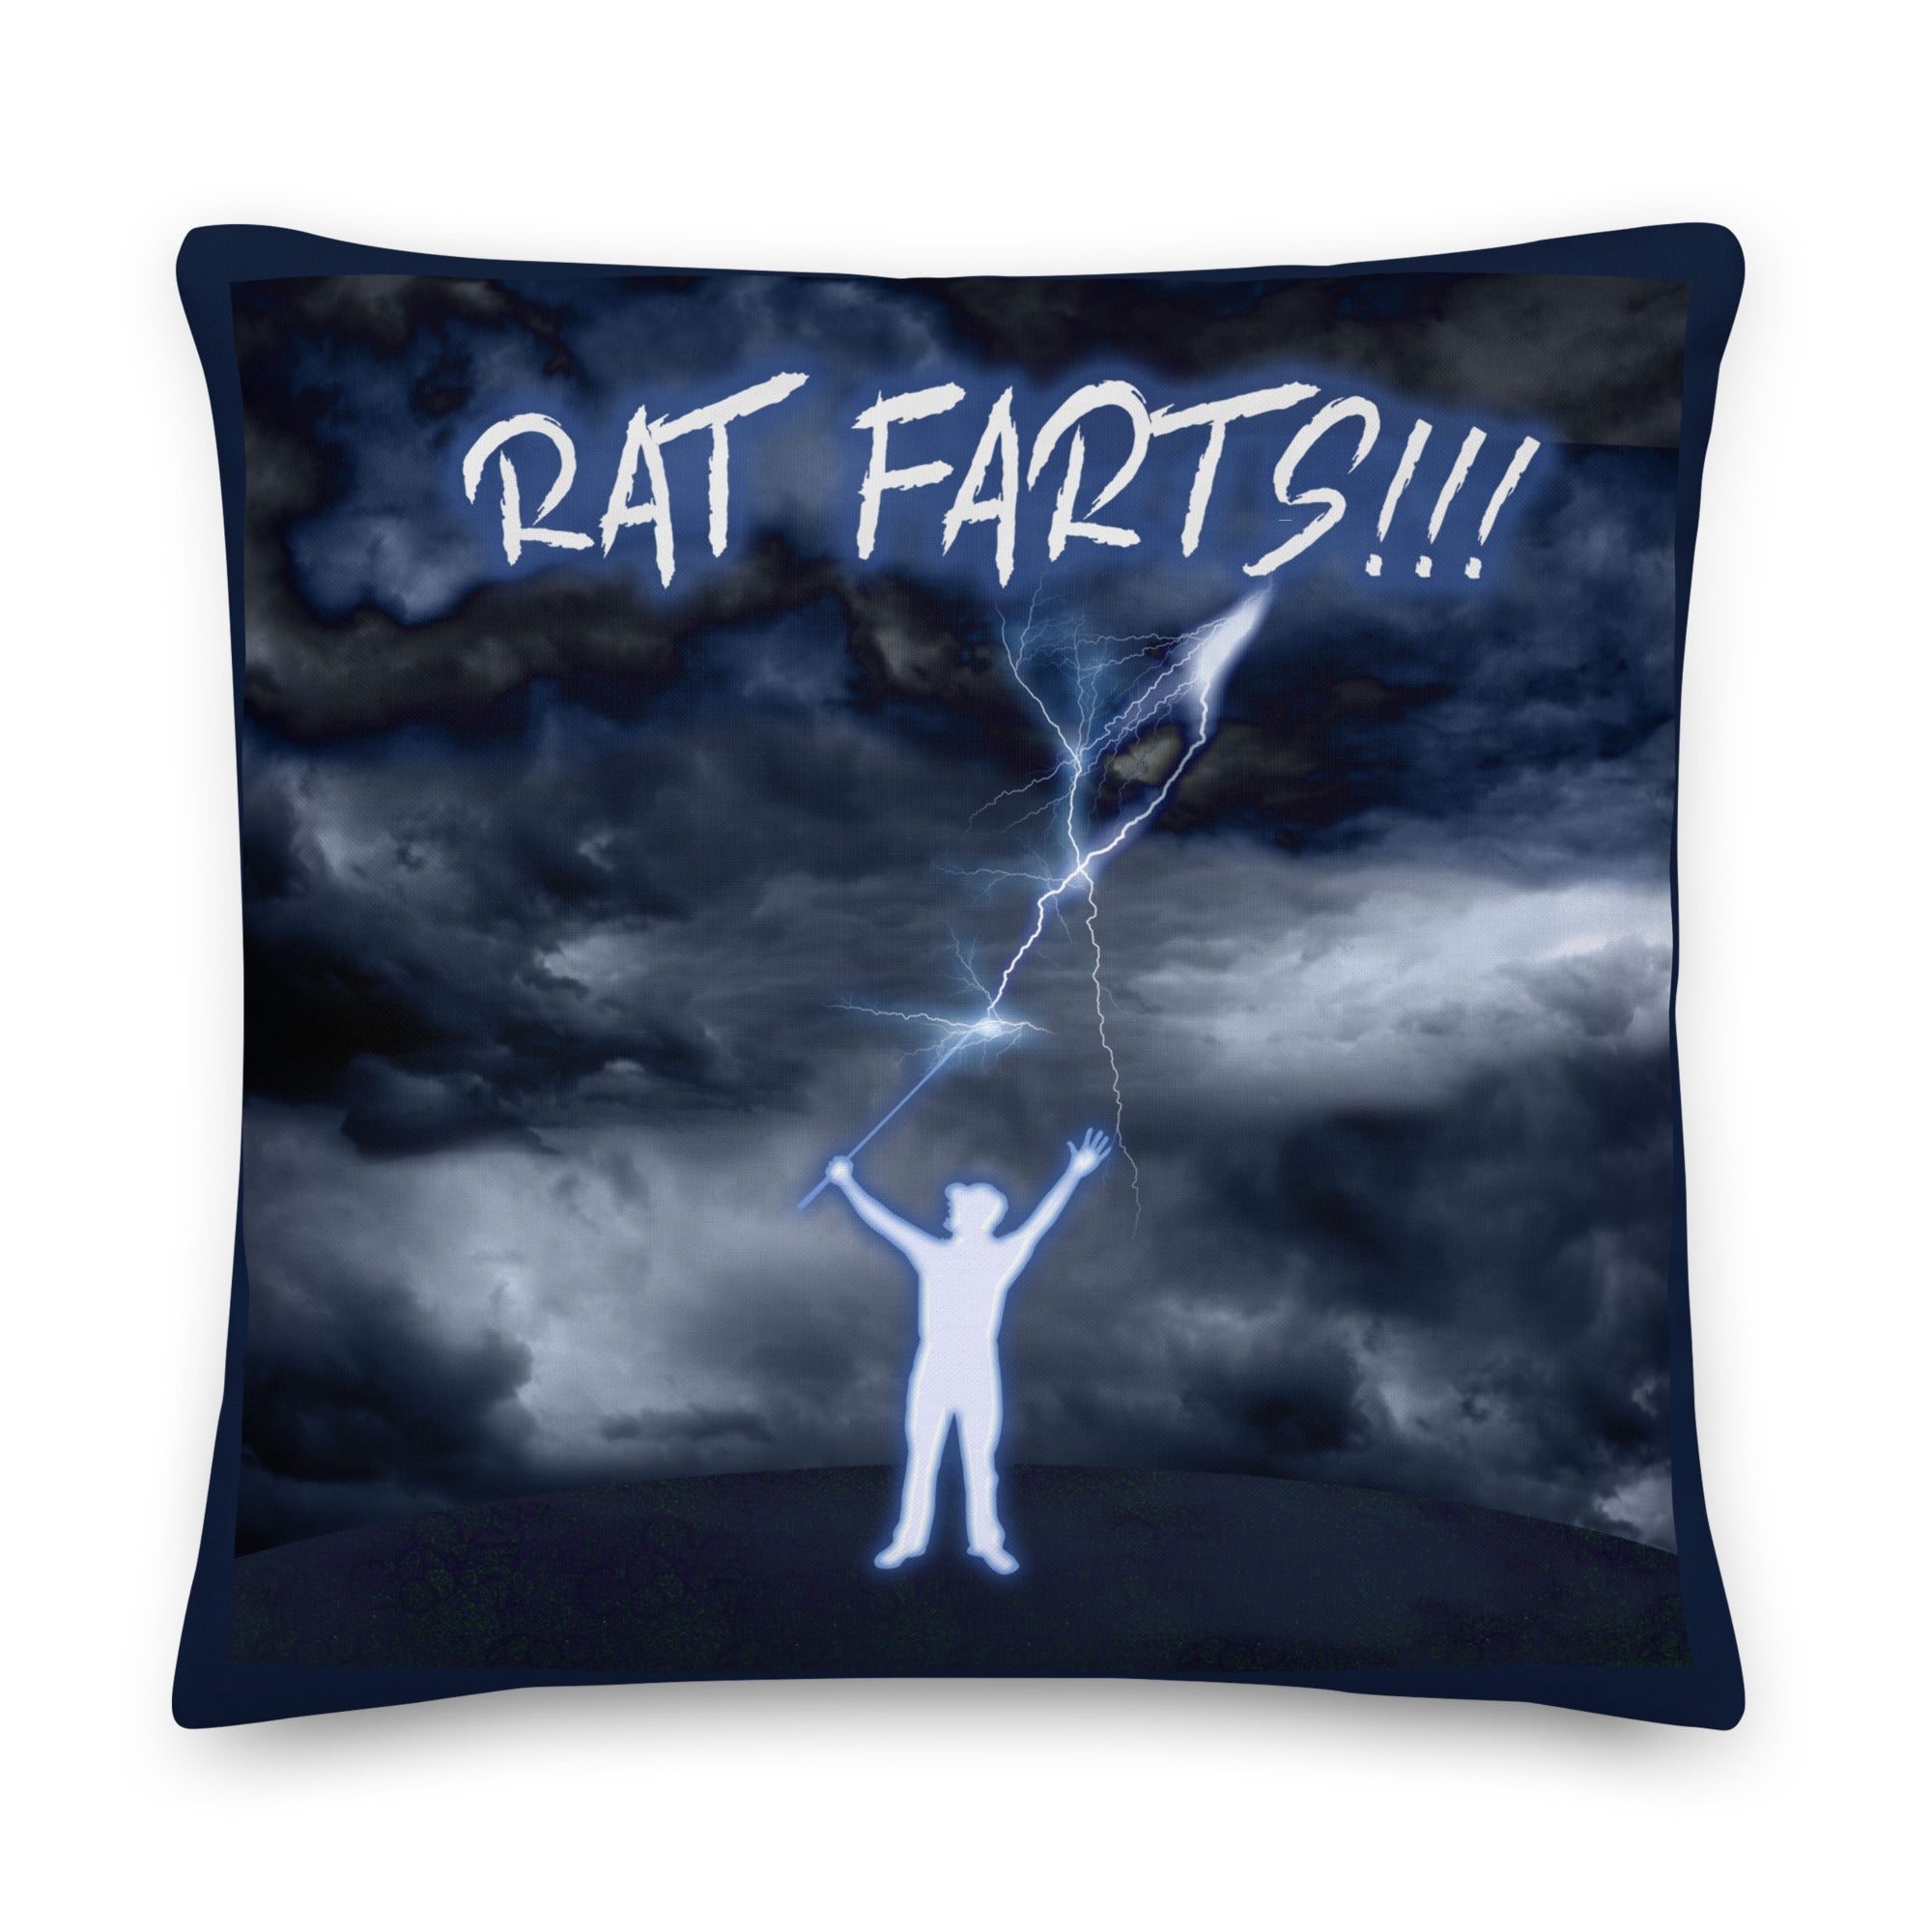 Blue pillow with Rat Farts on it